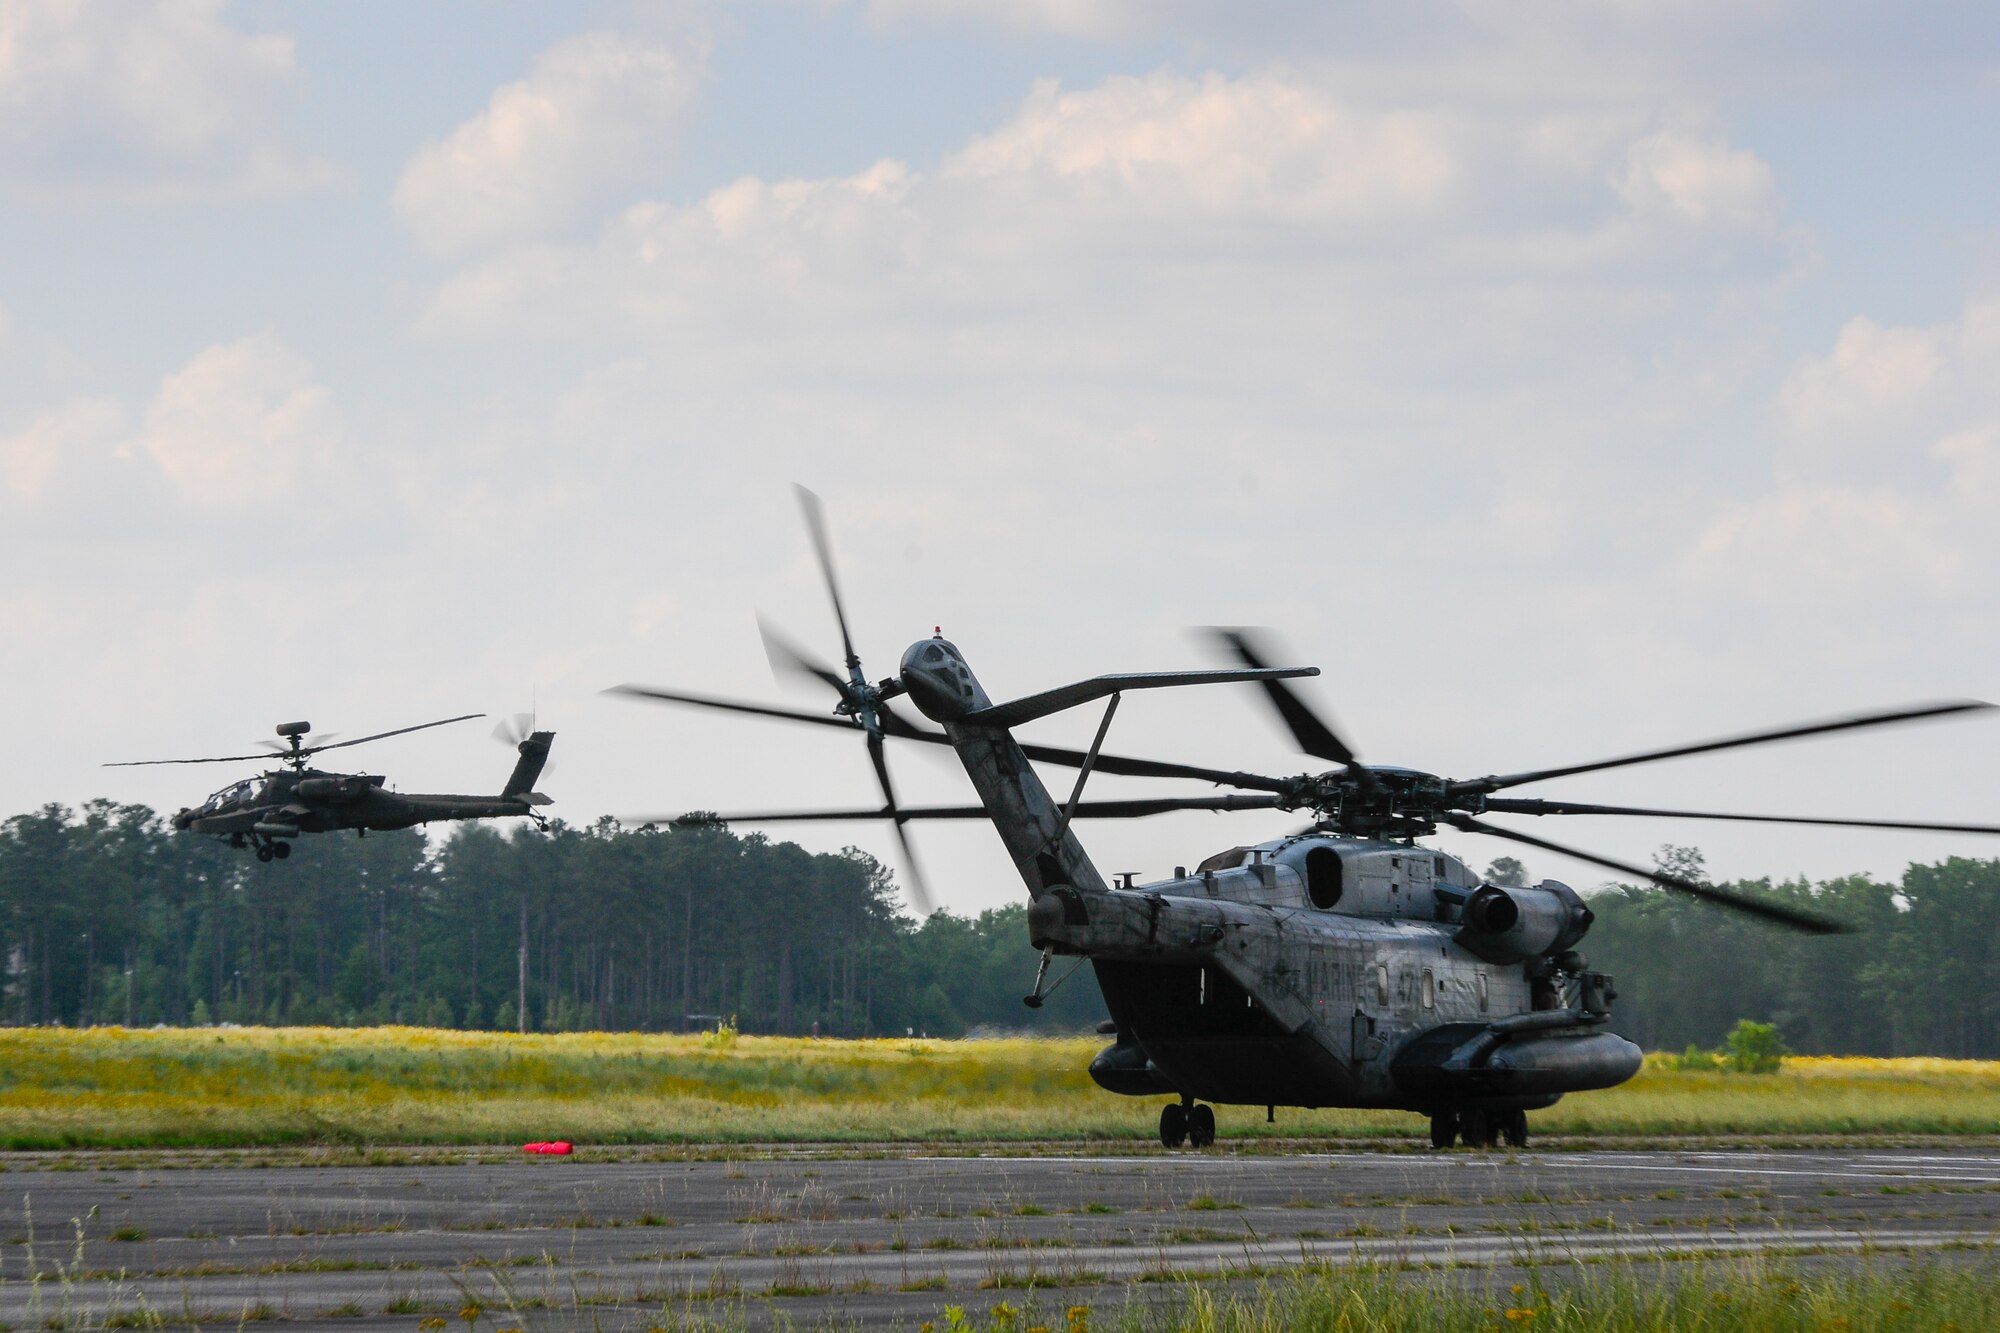 A U.S. Army AH-64 Apache lifts off from the left as a U.S. Marine CH-53 Sea Stallion taxis on the right during forward air refueling point operations at McEntire Joint National Guard Base, S.C. on May 14, 2014.  Elements of the South Carolina Air and Army National Guard and the U.S. Marines conduct joint operations which are crucial to the ongoing success of operational readiness and deployments around the world.  (U.S. Air National Guard photo by Tech Sgt. Jorge Intriago/Released)